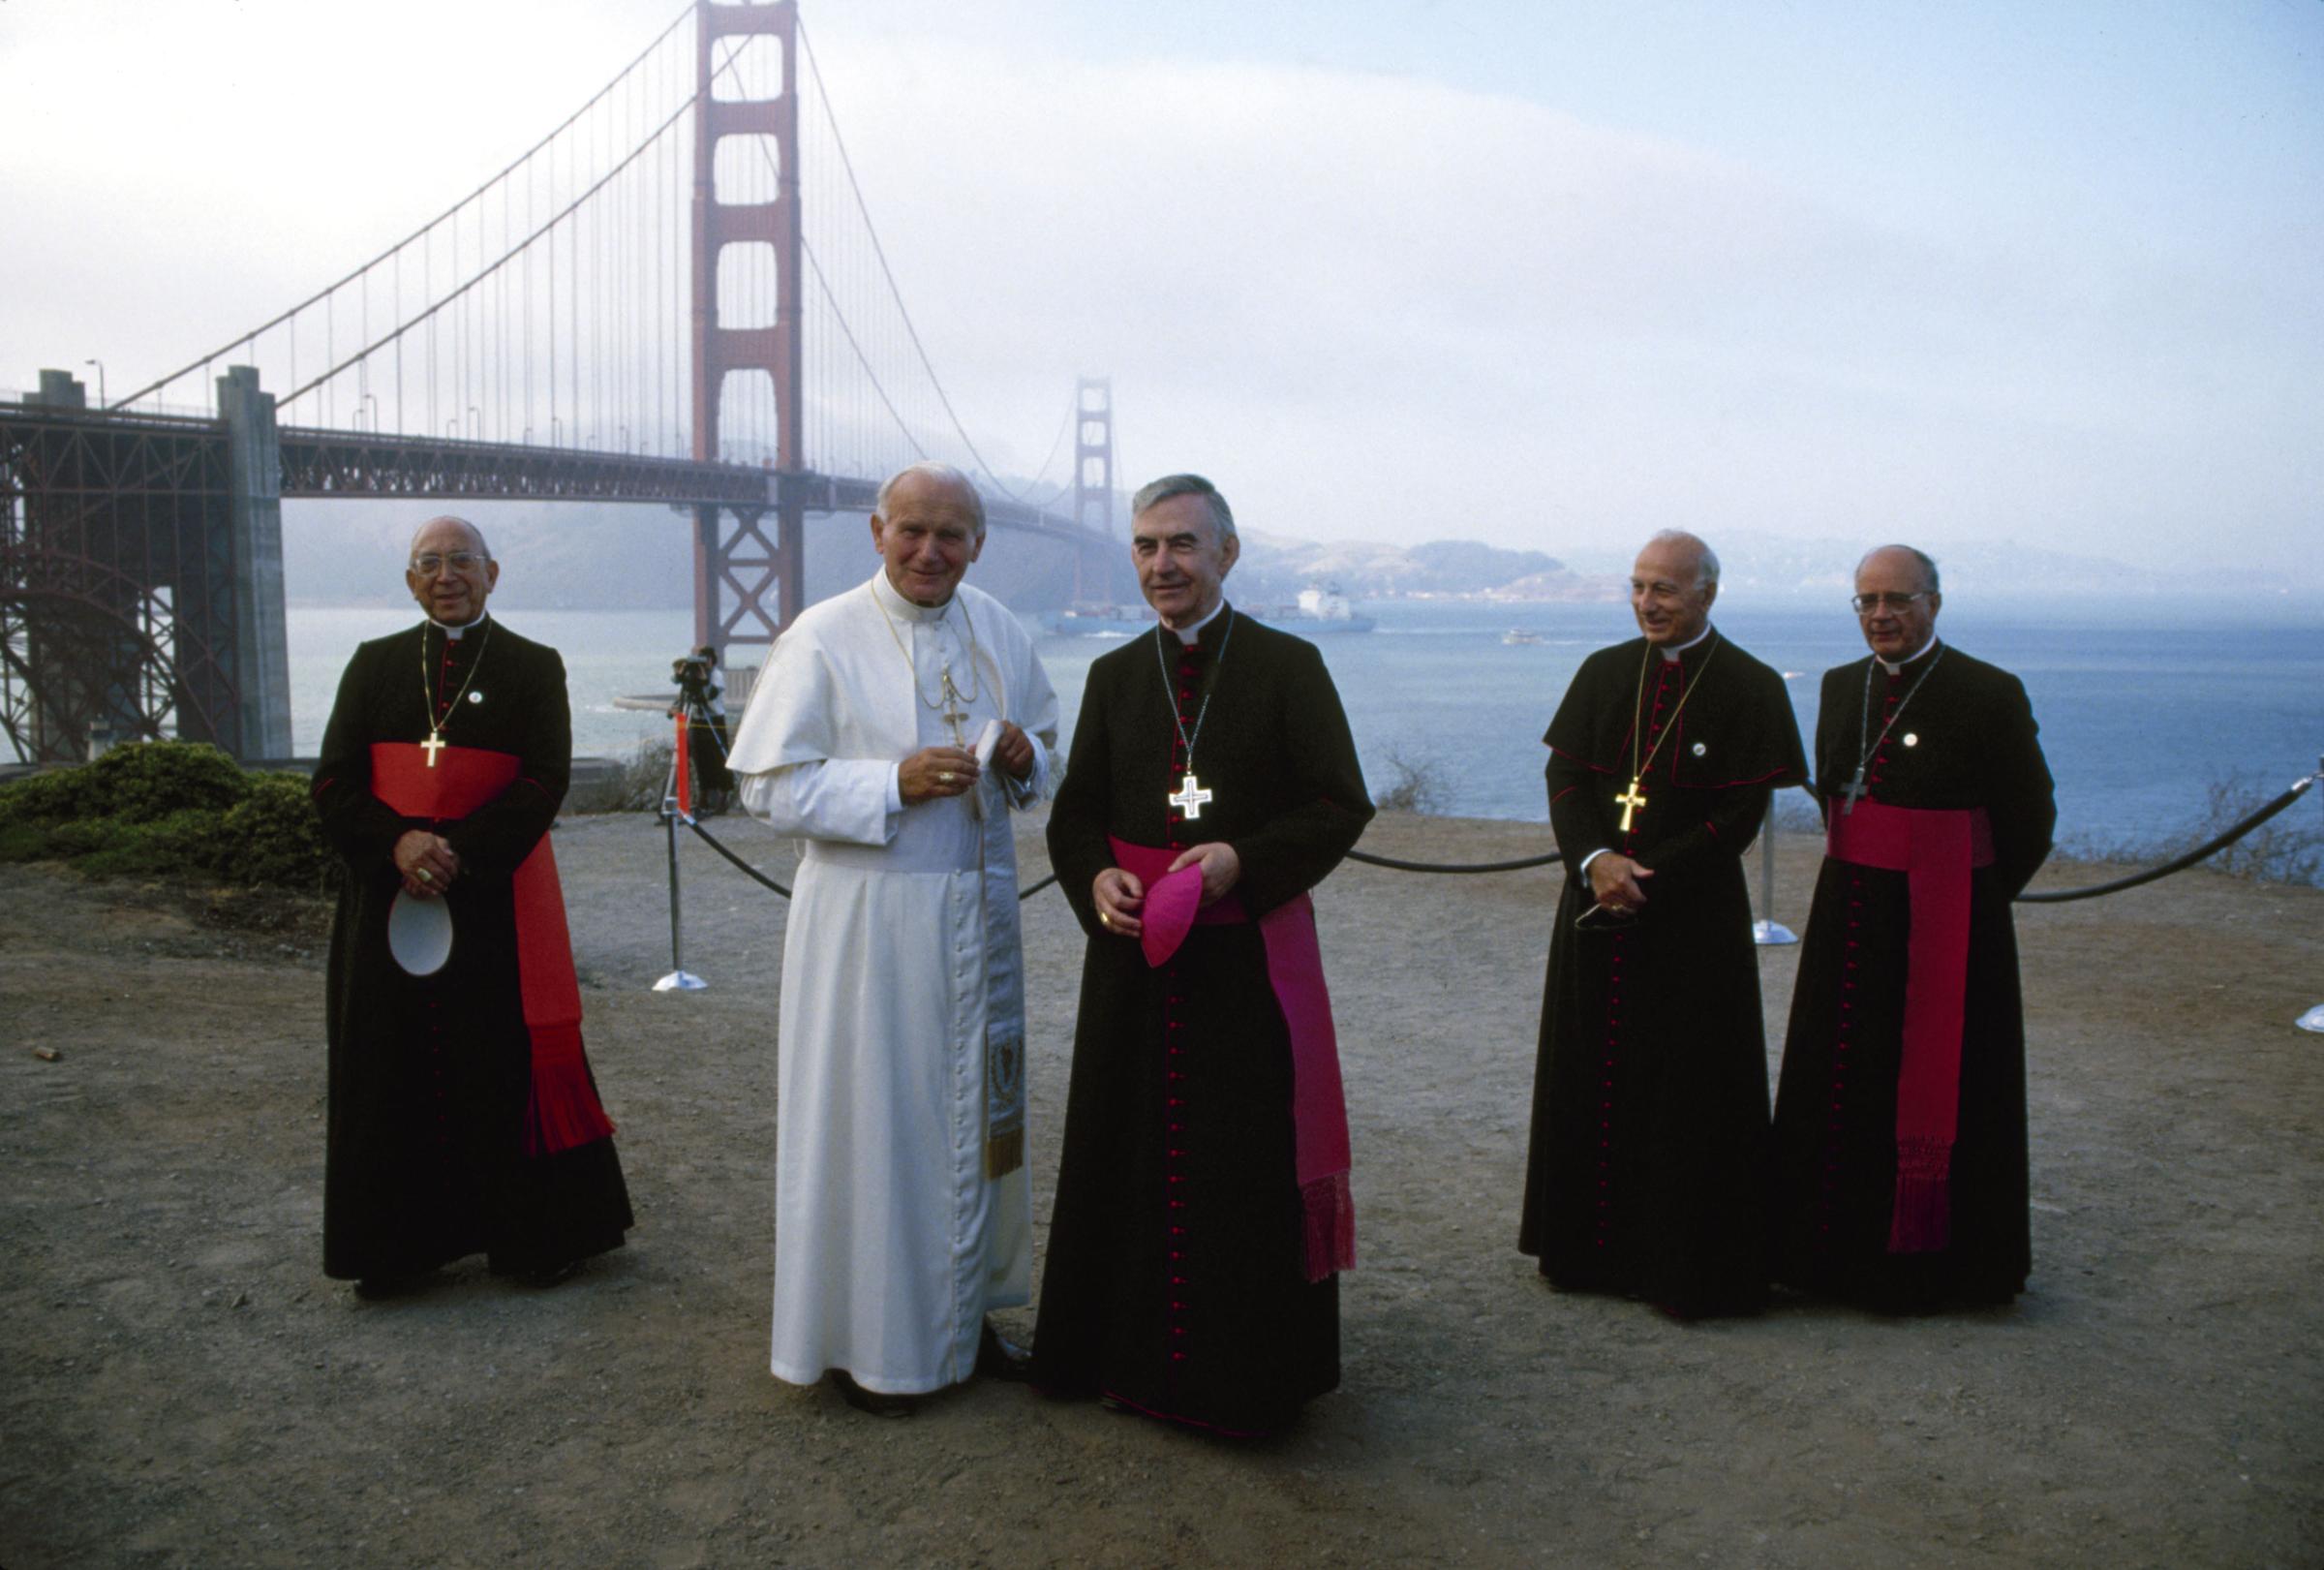 Pope John Paul II (born poses with American Bishop (and later Archibishop) John R. Quinn (center) during a visit to Golden Gate Park, San Francisco, California, September 18, 1987. With them in the background are Italian Cardinal Secretary of State Agostino Casaroli (left), Italian Apostolic Pro-Nuncio to the United States (and later Cardinal) Pio Laghi (second right), and Spanish Archbishop Substitute for General Affairs (and later Cardinal) Eduardo Martinez Somalo (right).